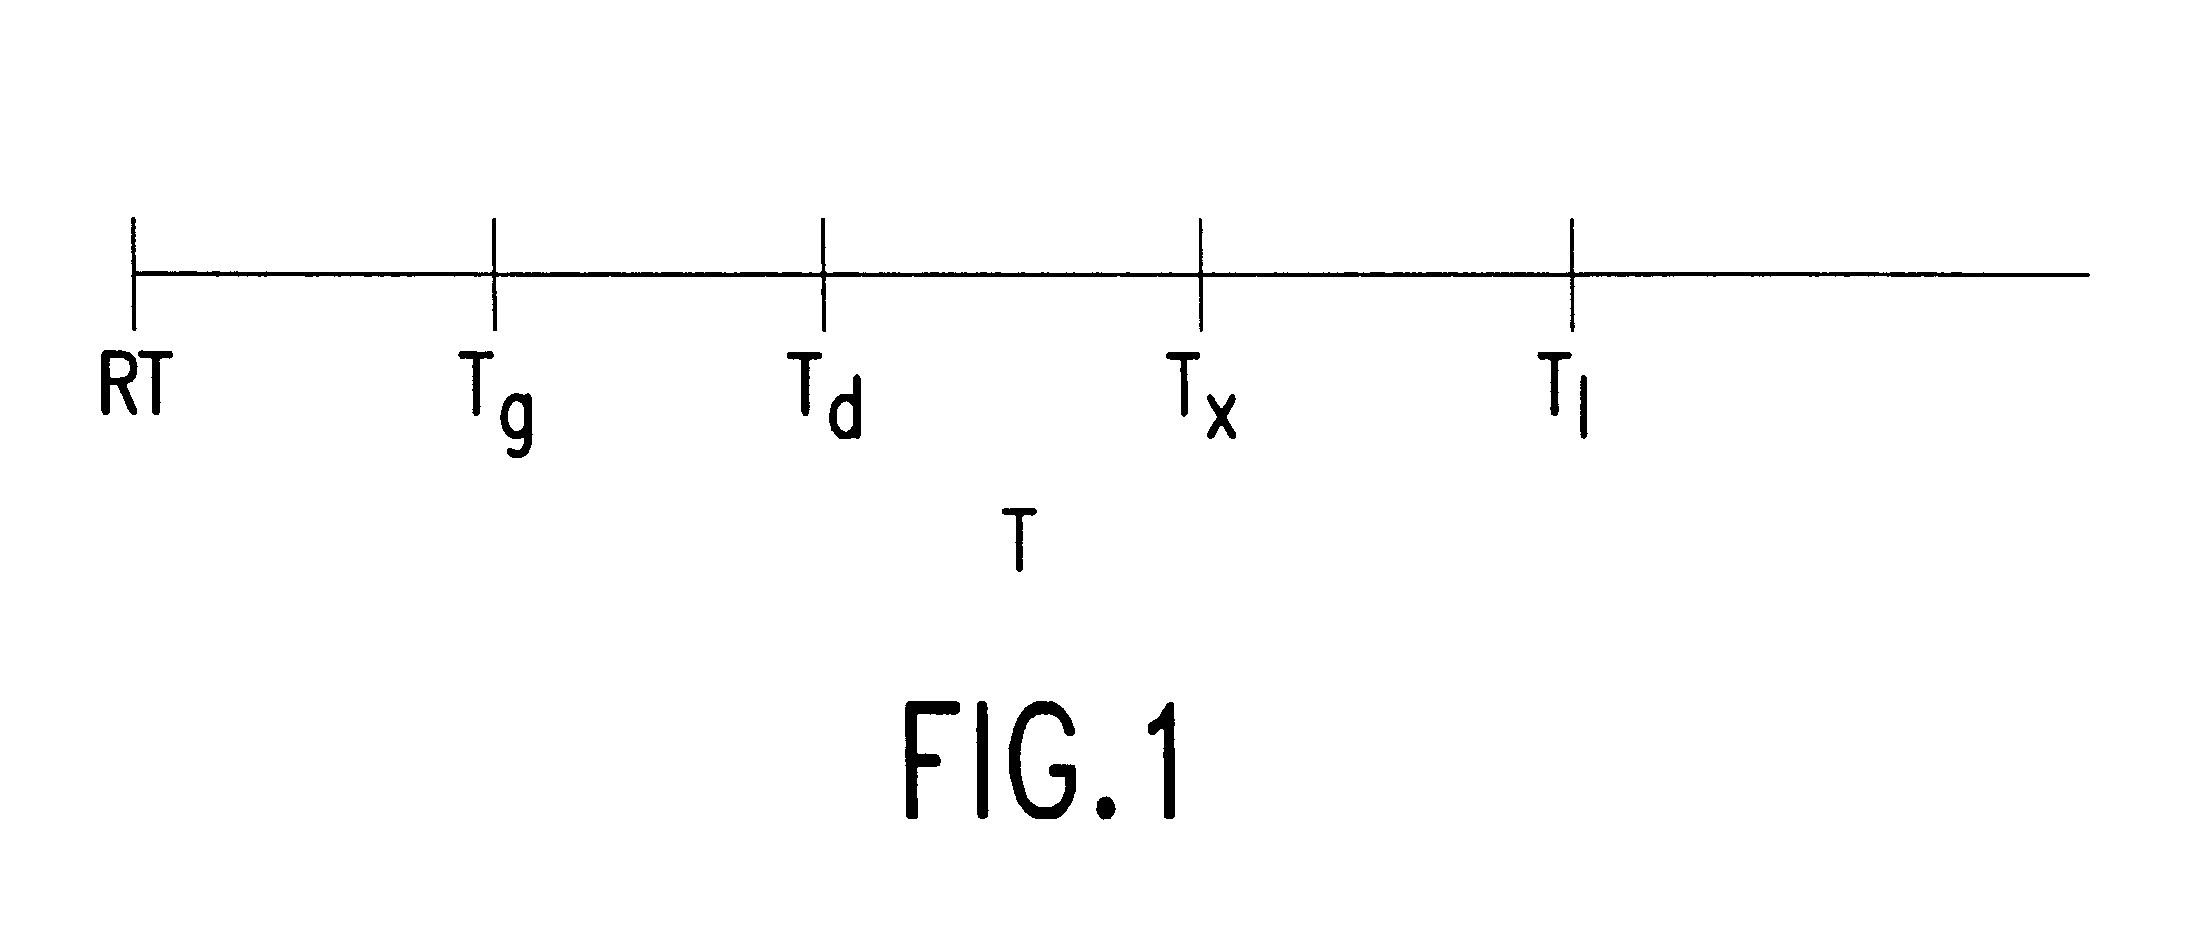 Multi heating zone apparatus and process for making core/clad glass fibers